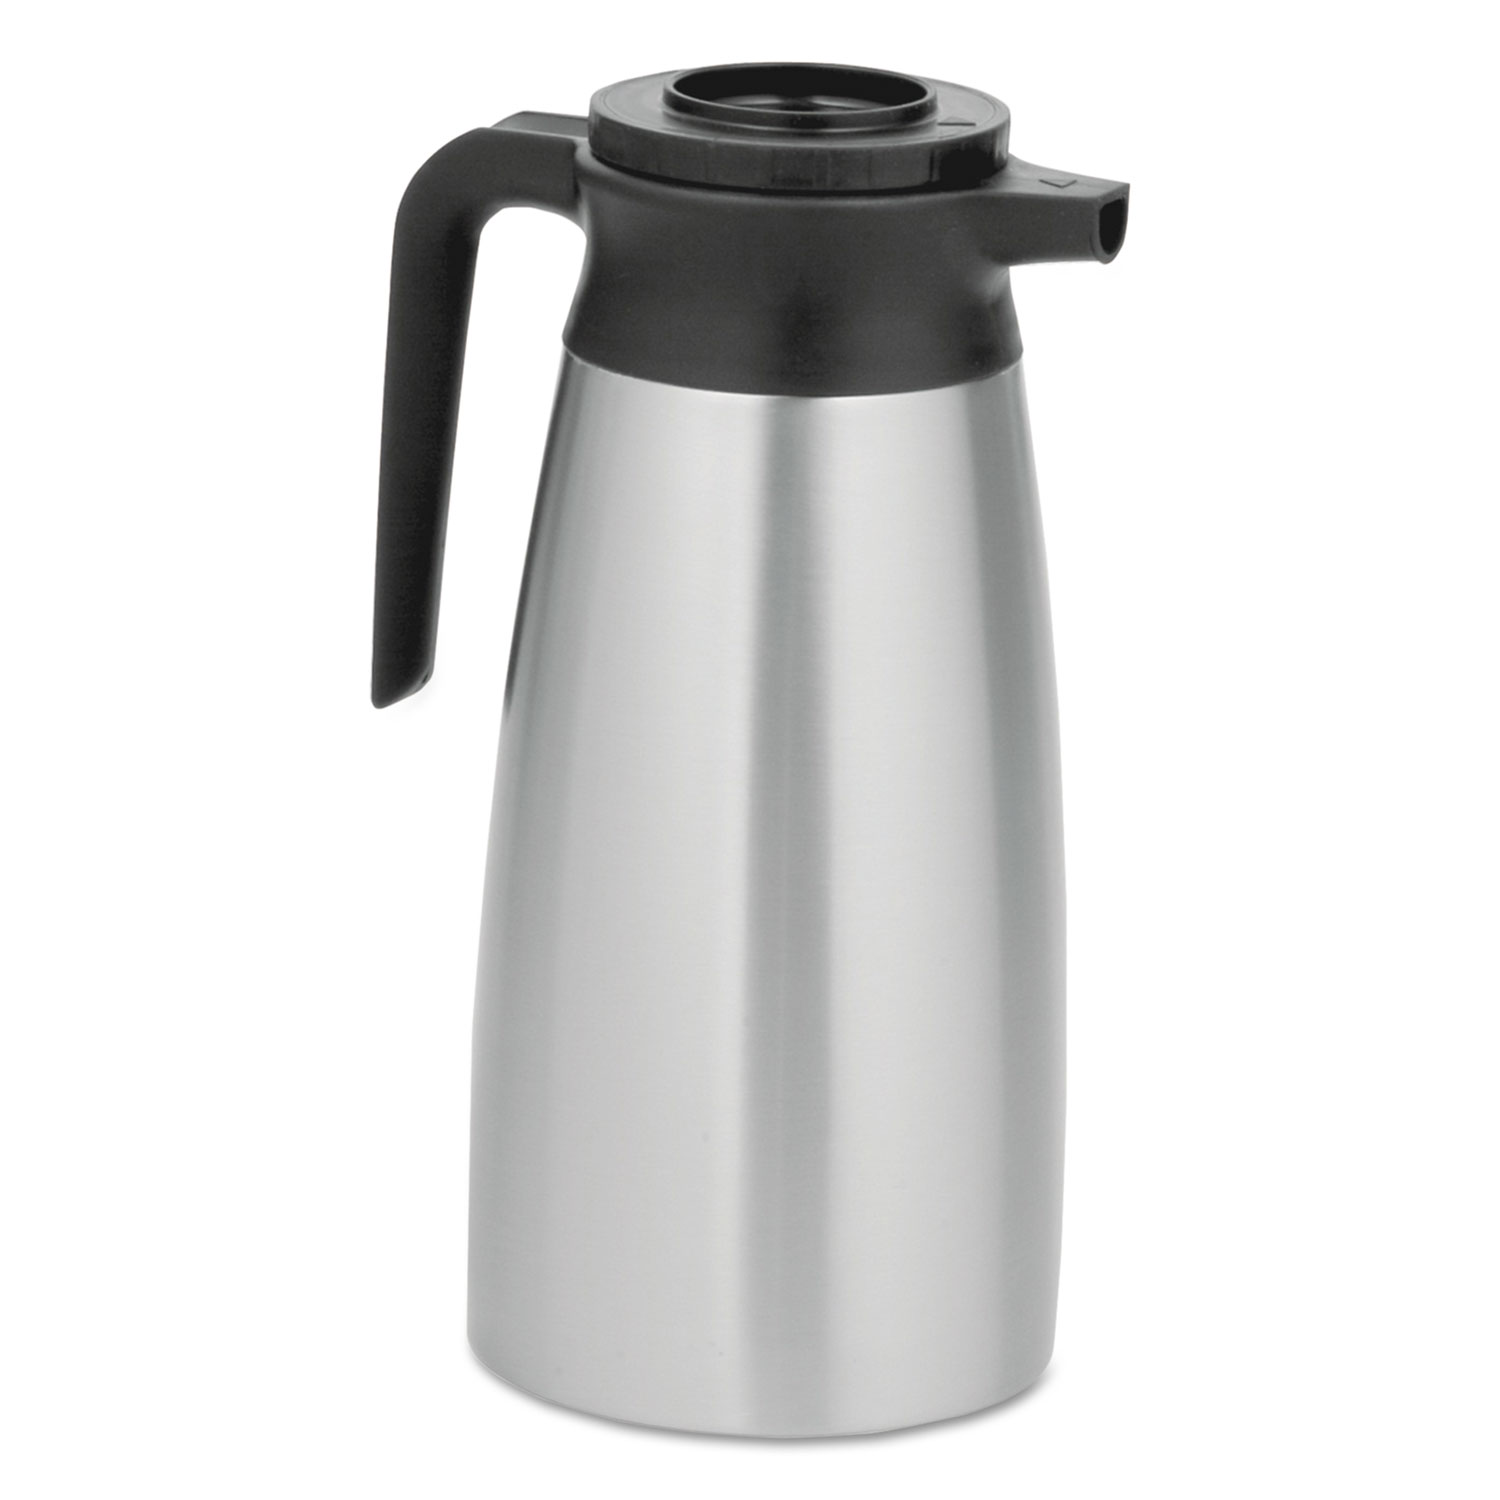 1.9 Liter Thermal Pitcher, Stainless Steel/Black